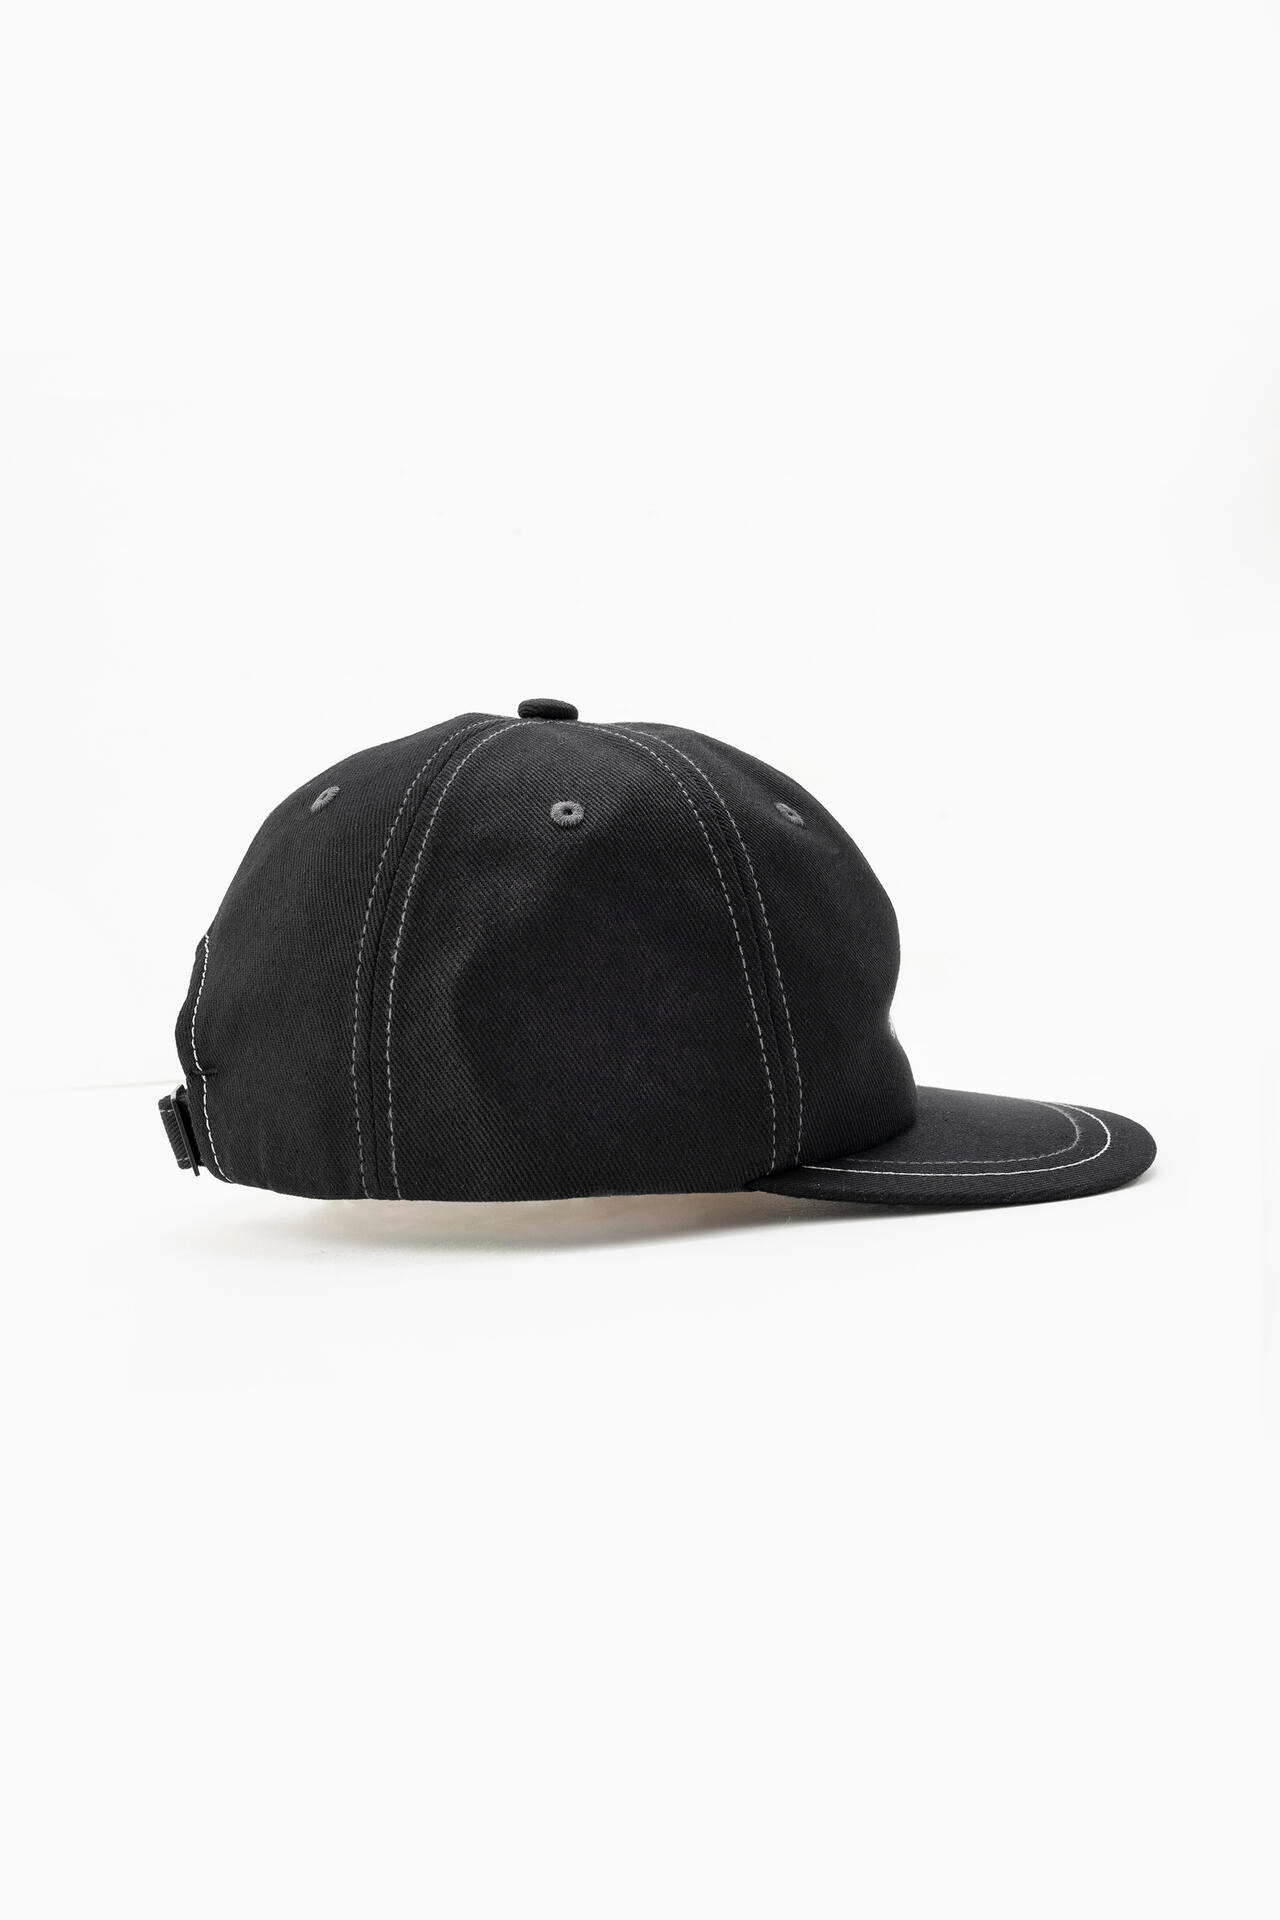 cotton twill cap | hats_caps | and wander ONLINE STORE